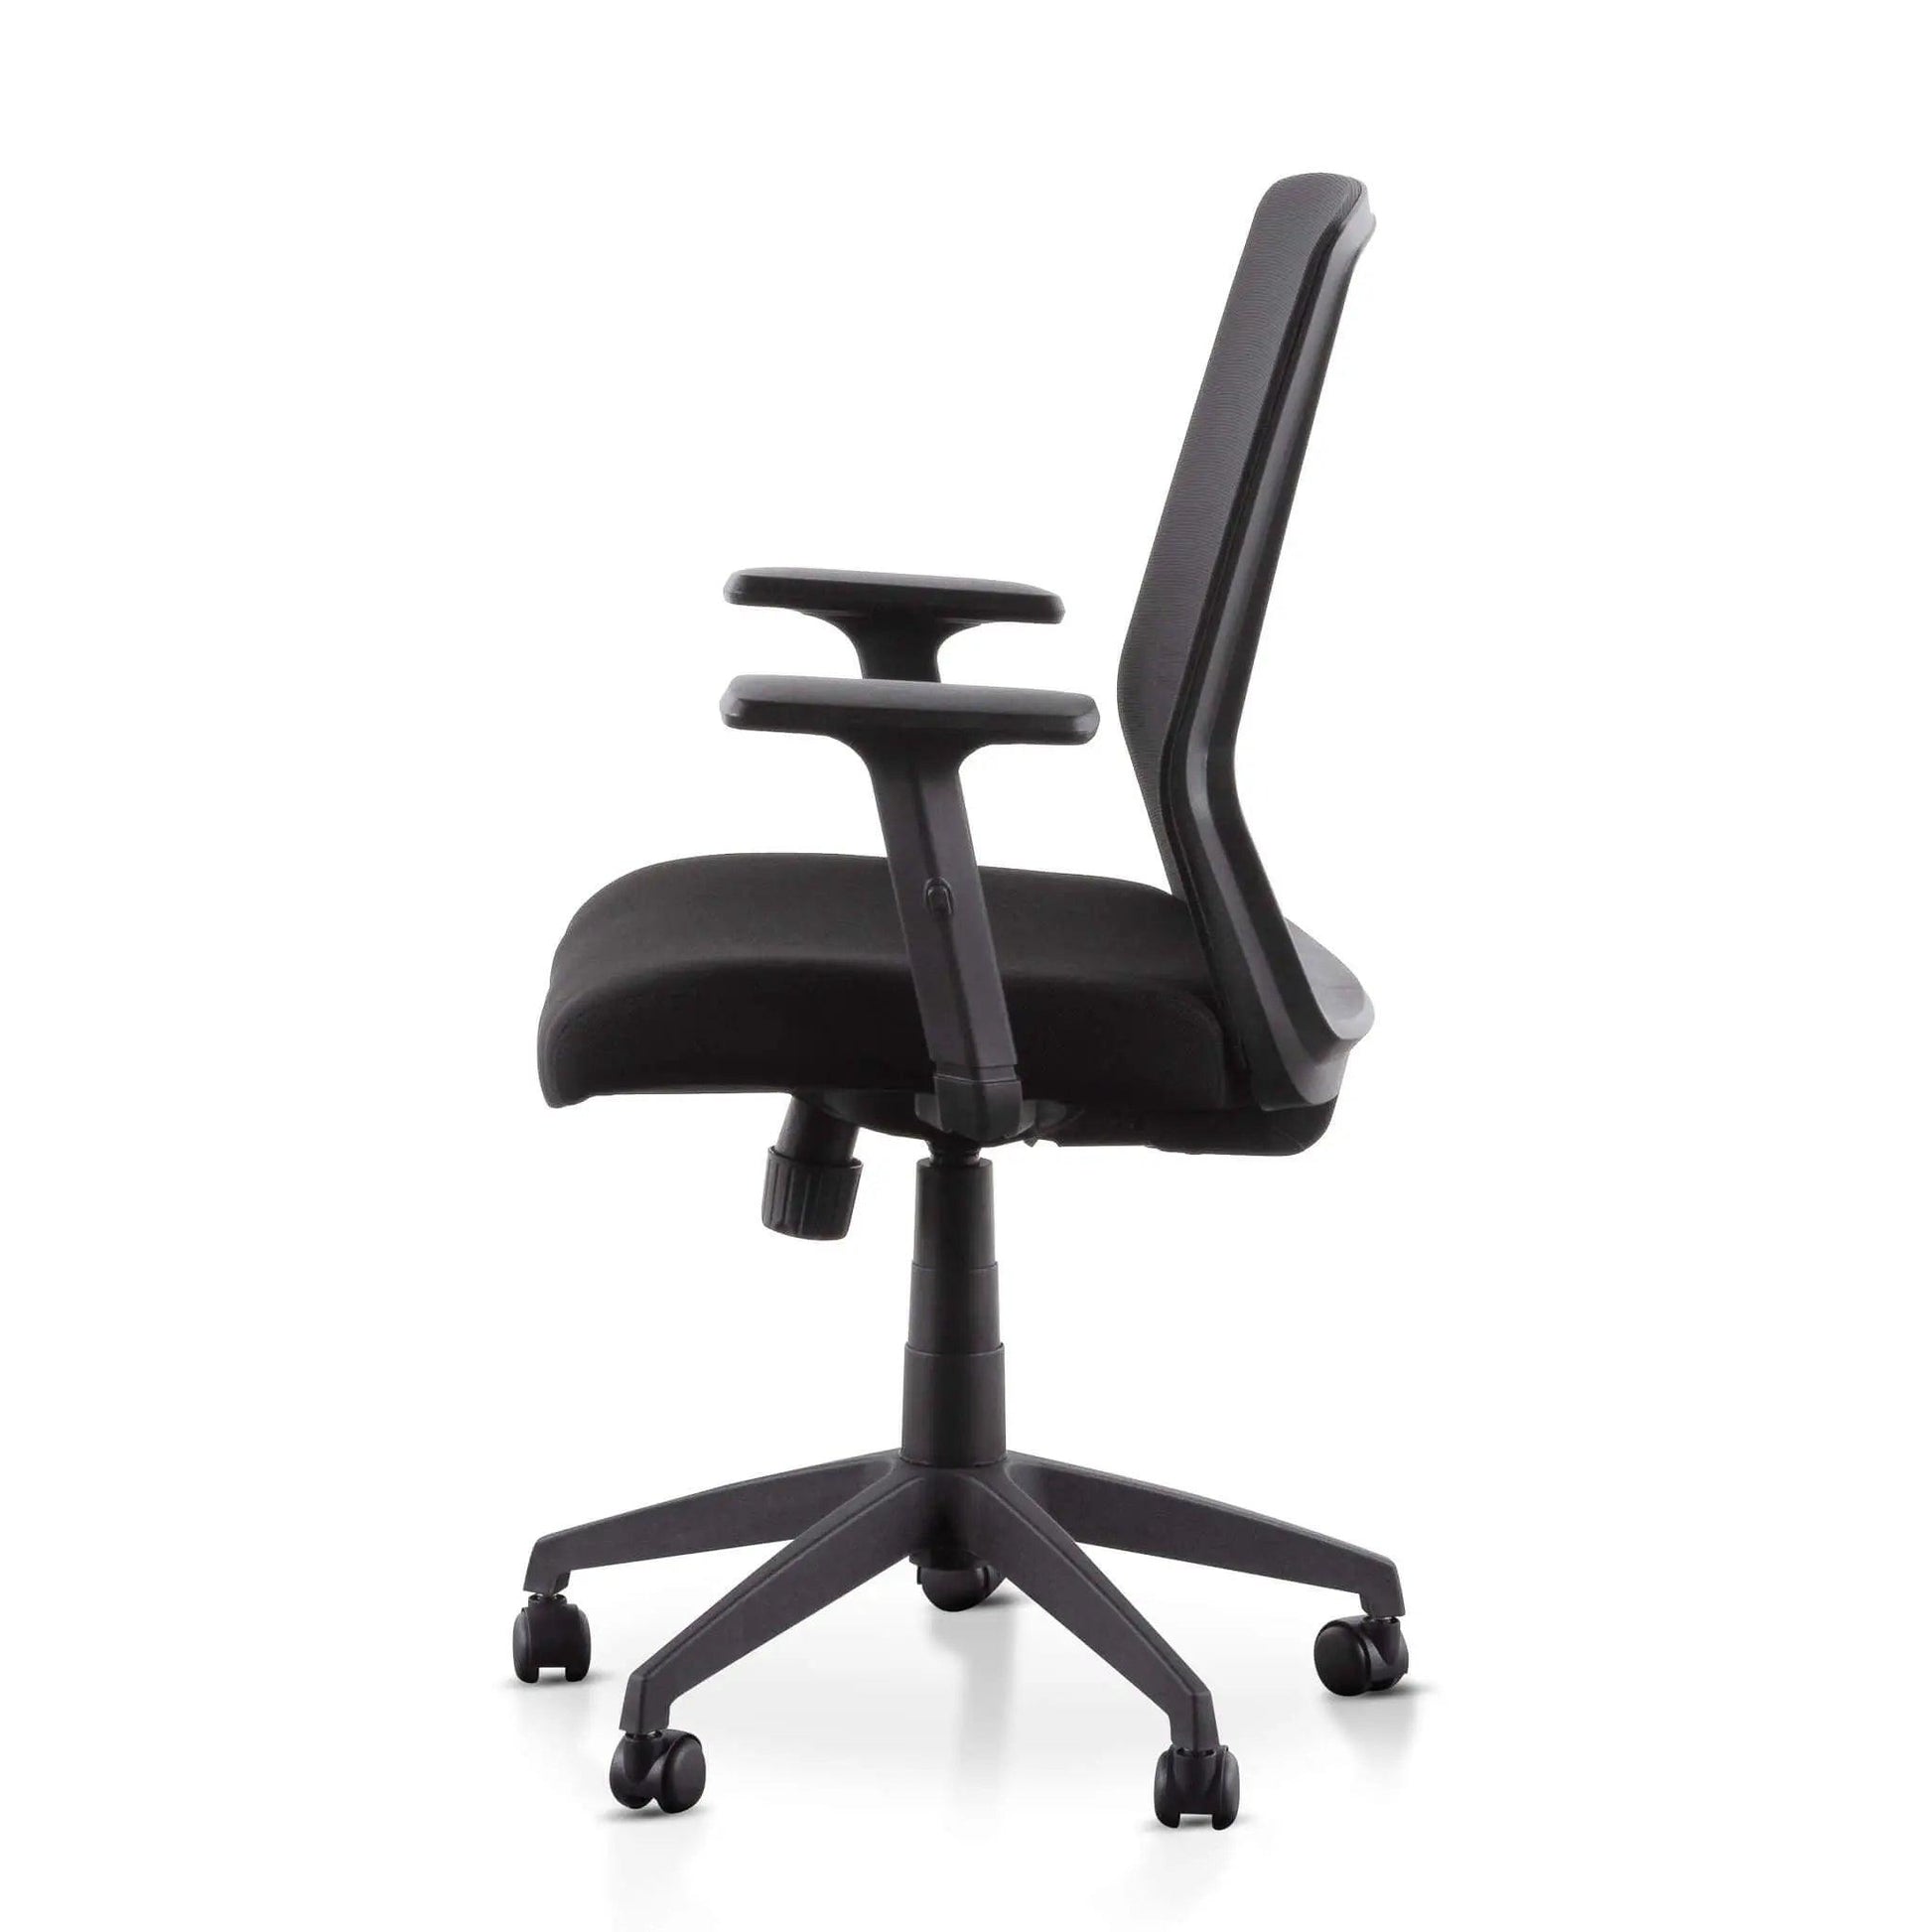 Calibre Mesh Office Chair - Full Black OC6207-LF - Office/Gaming ChairsOC6207-LF 3